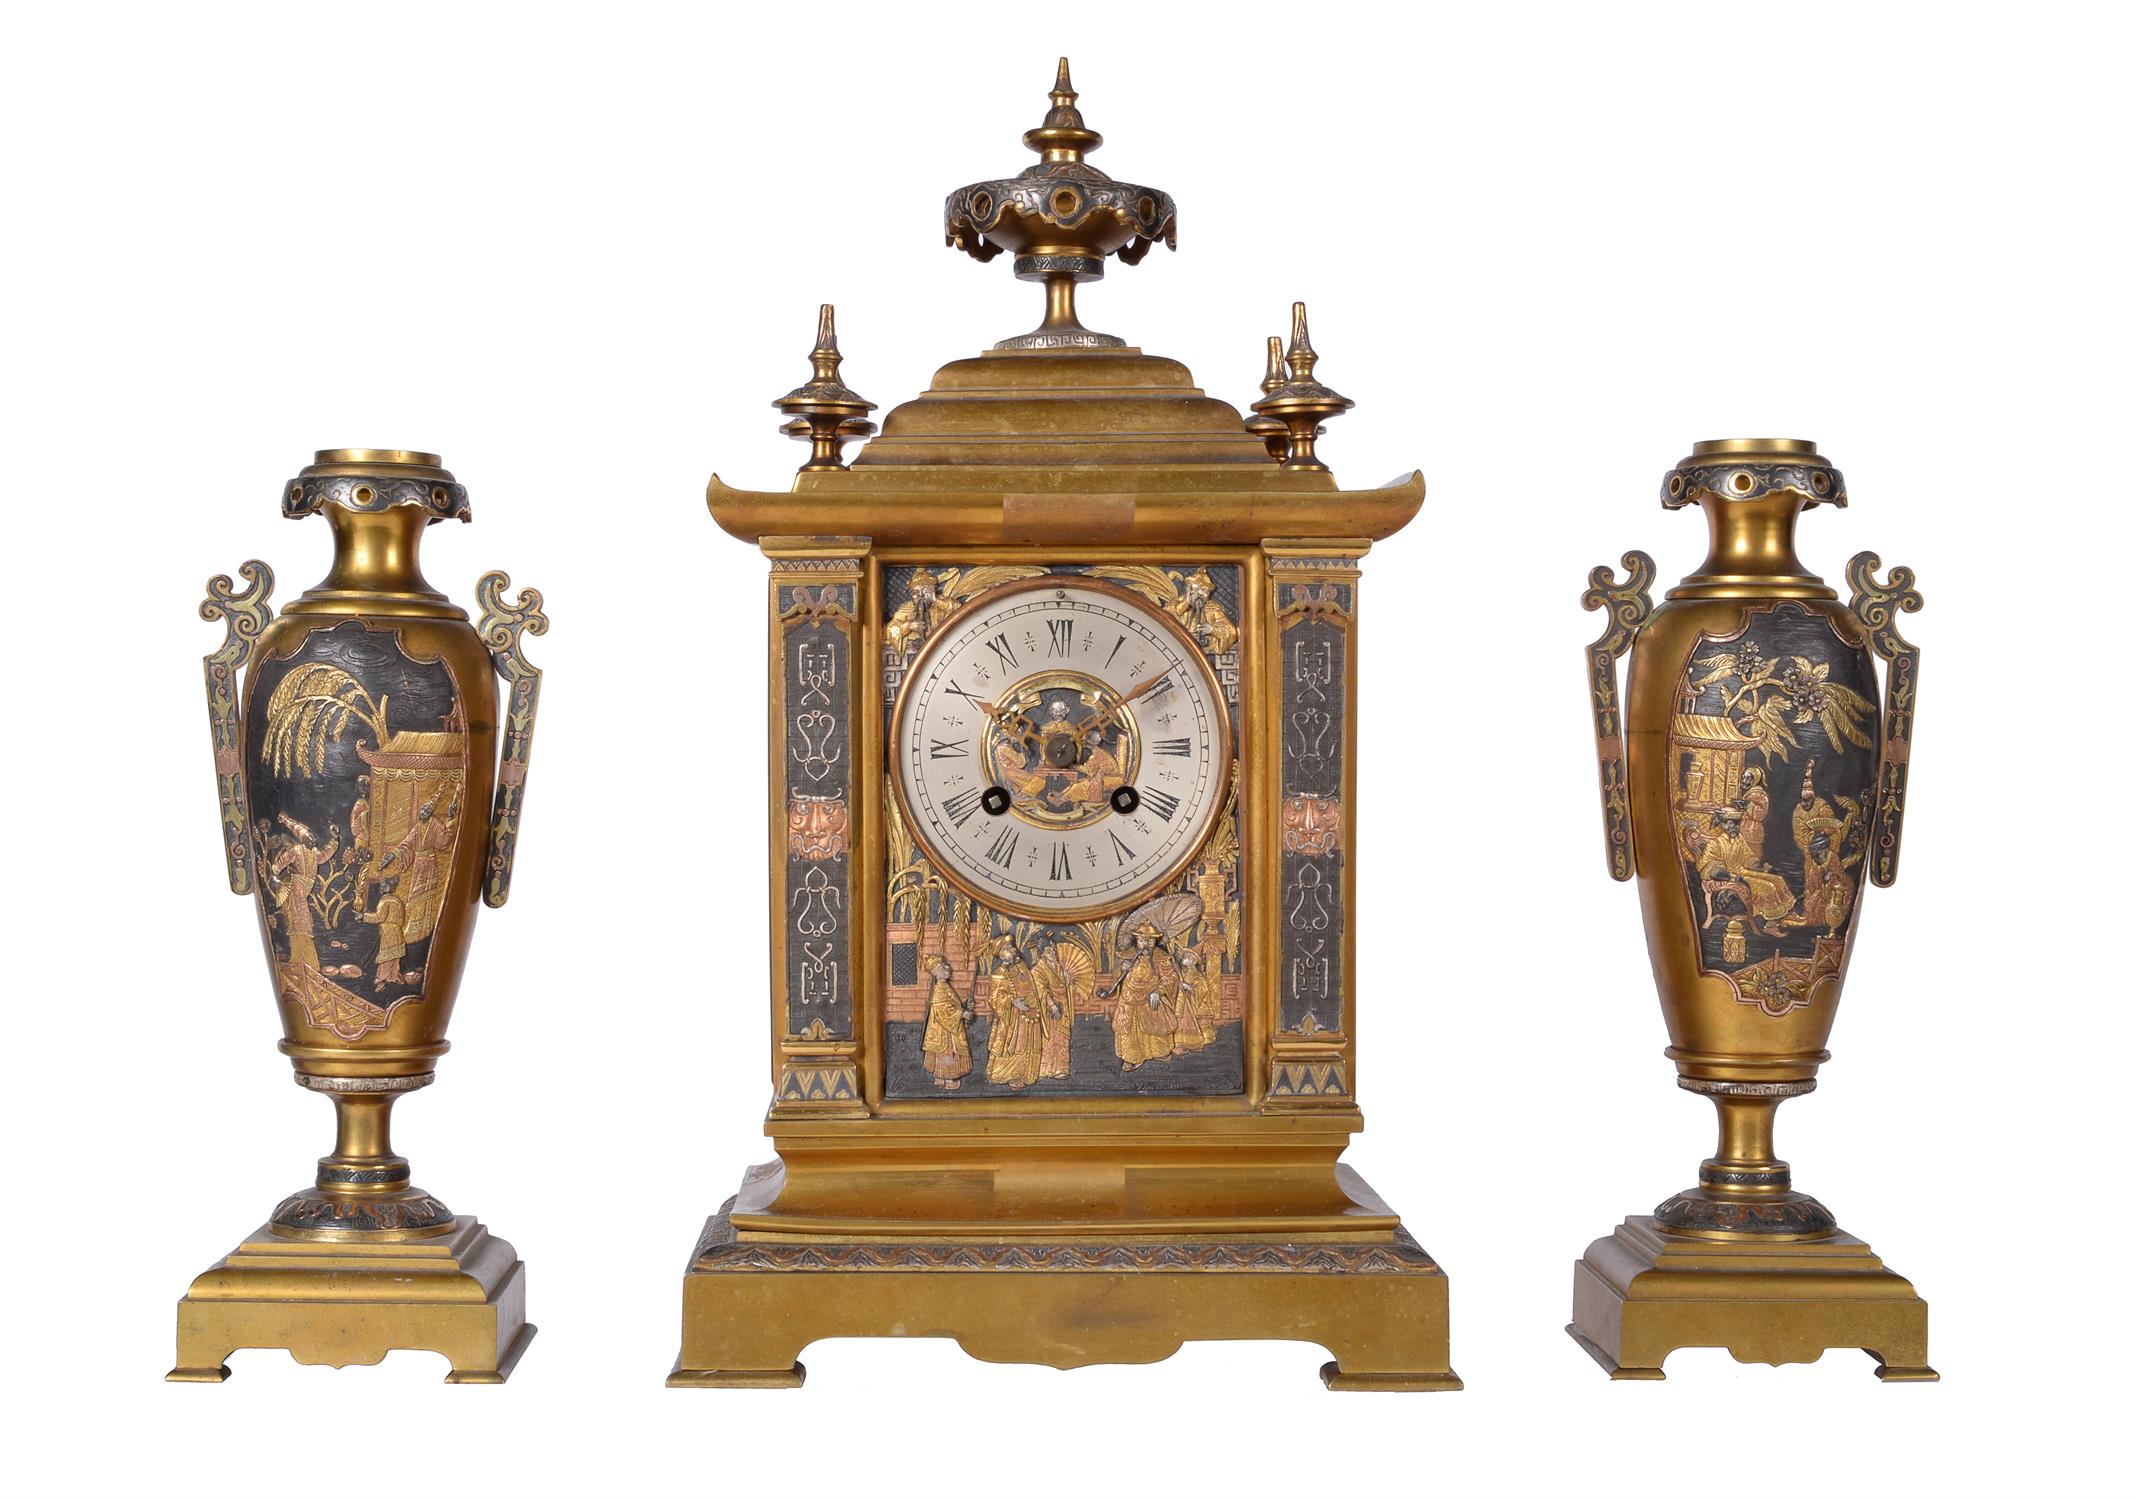 A French brass mantel clock garniture with relief cast panels